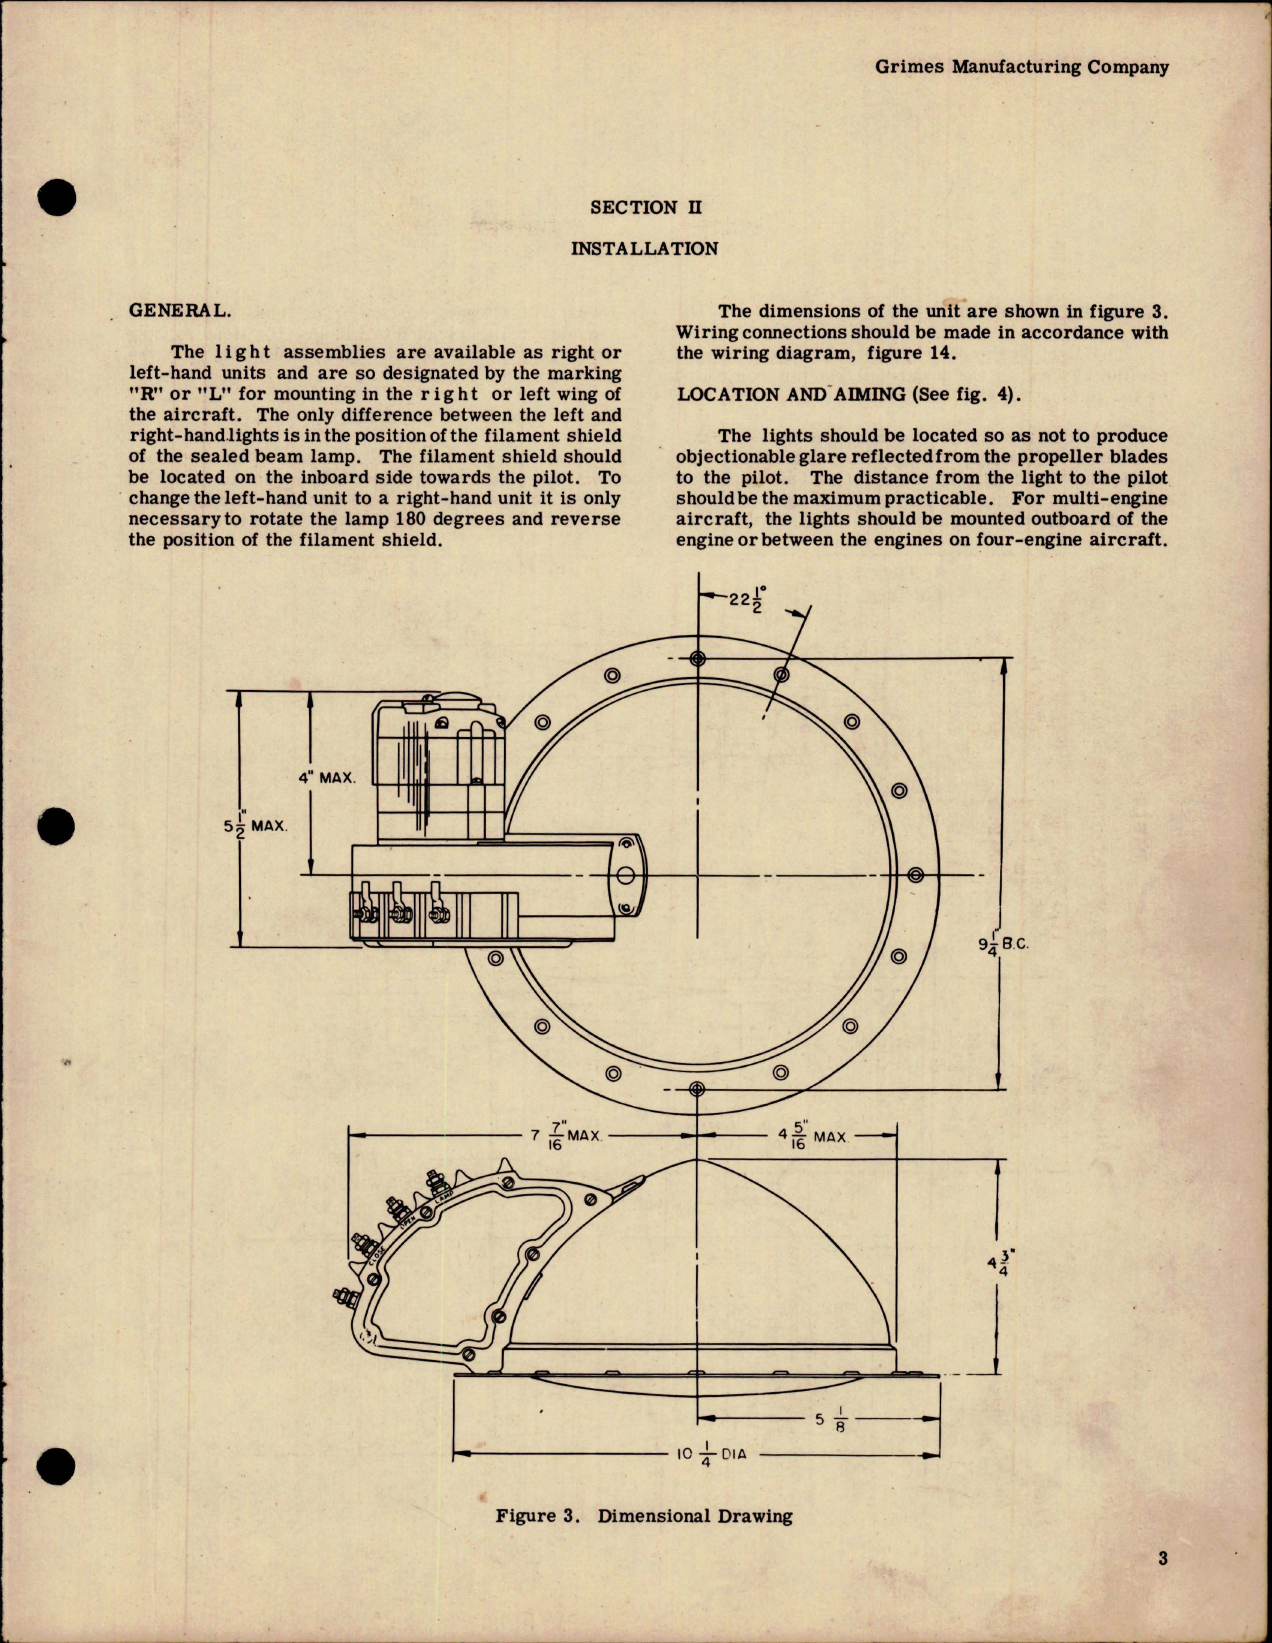 Sample page 7 from AirCorps Library document: Handbook of Instructions with Parts for Electrically Retractable Landing Light Assemblies - G-3800A Series